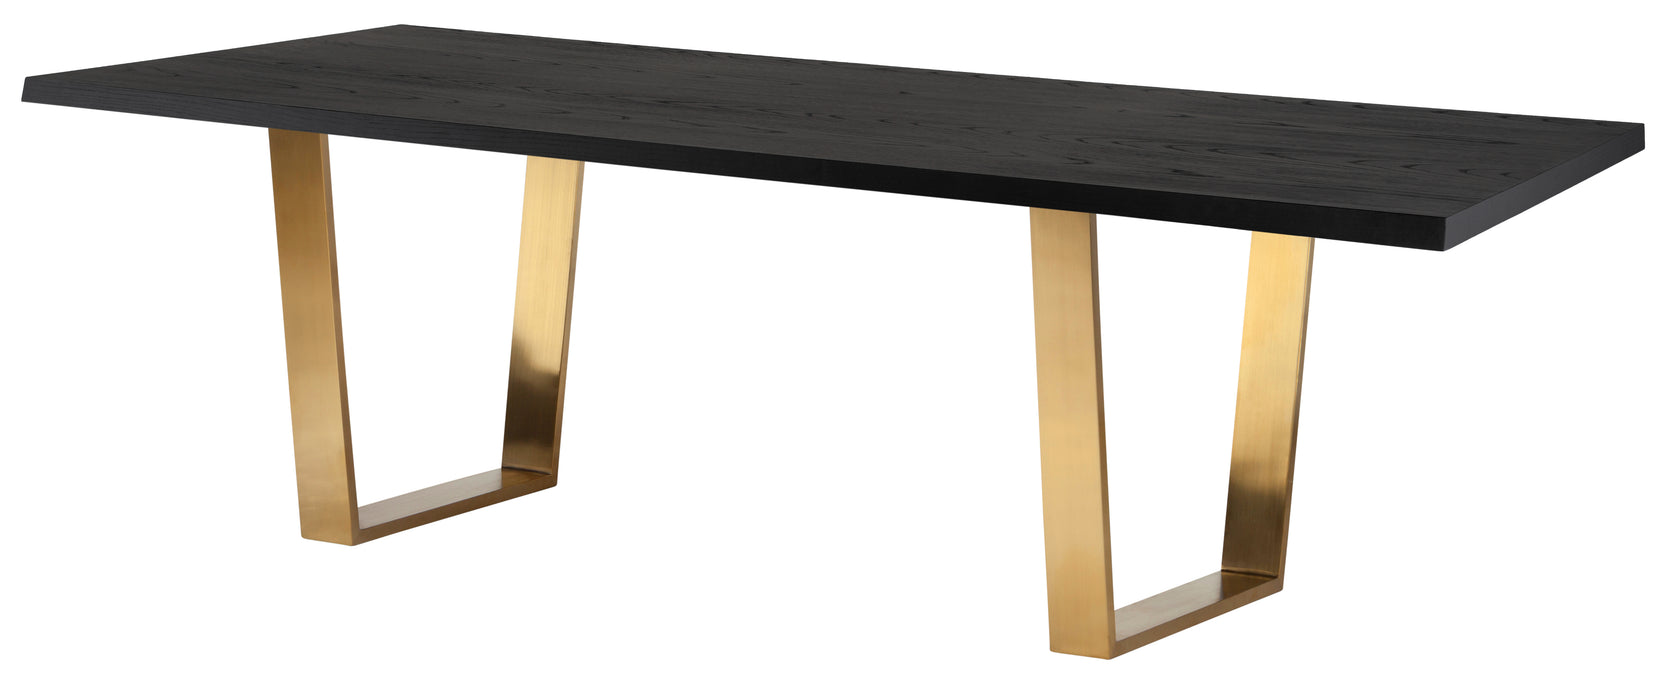 Versailles NL Onyx Dining Table